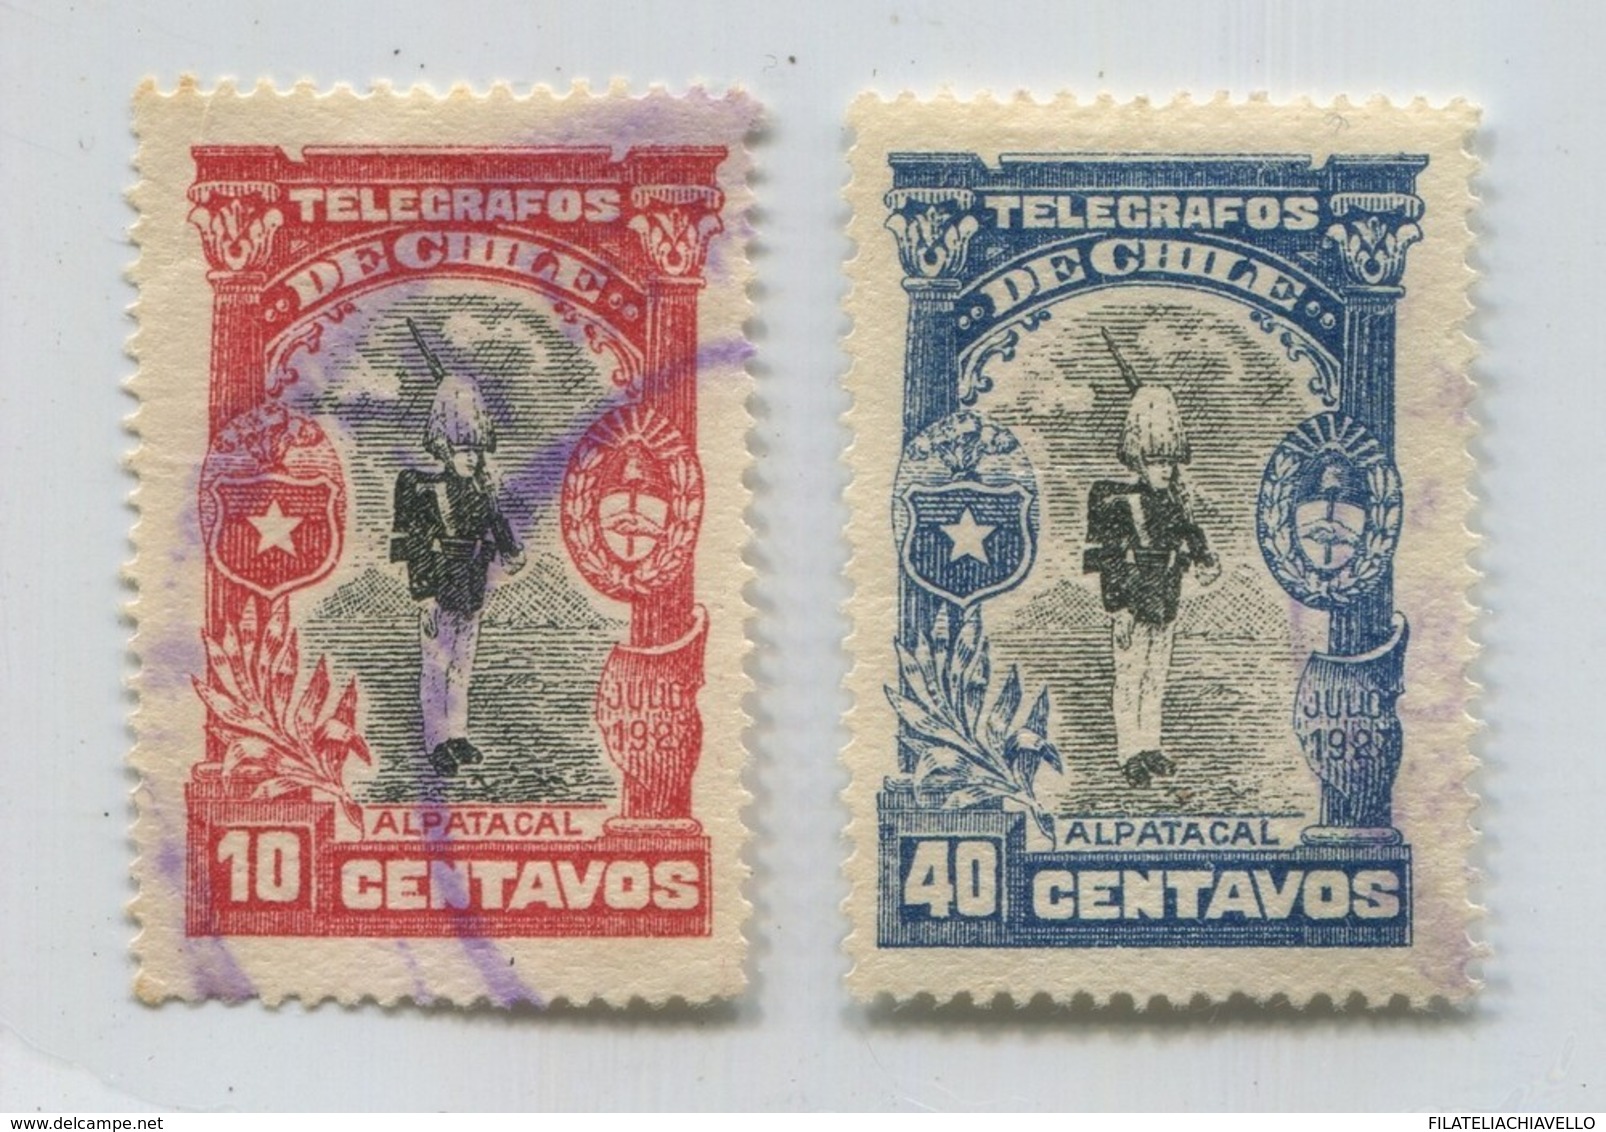 CHILE 1927 TELEGRAPH COMPLETE SET MILITARY STAMPS # 71790 111019 - Chile